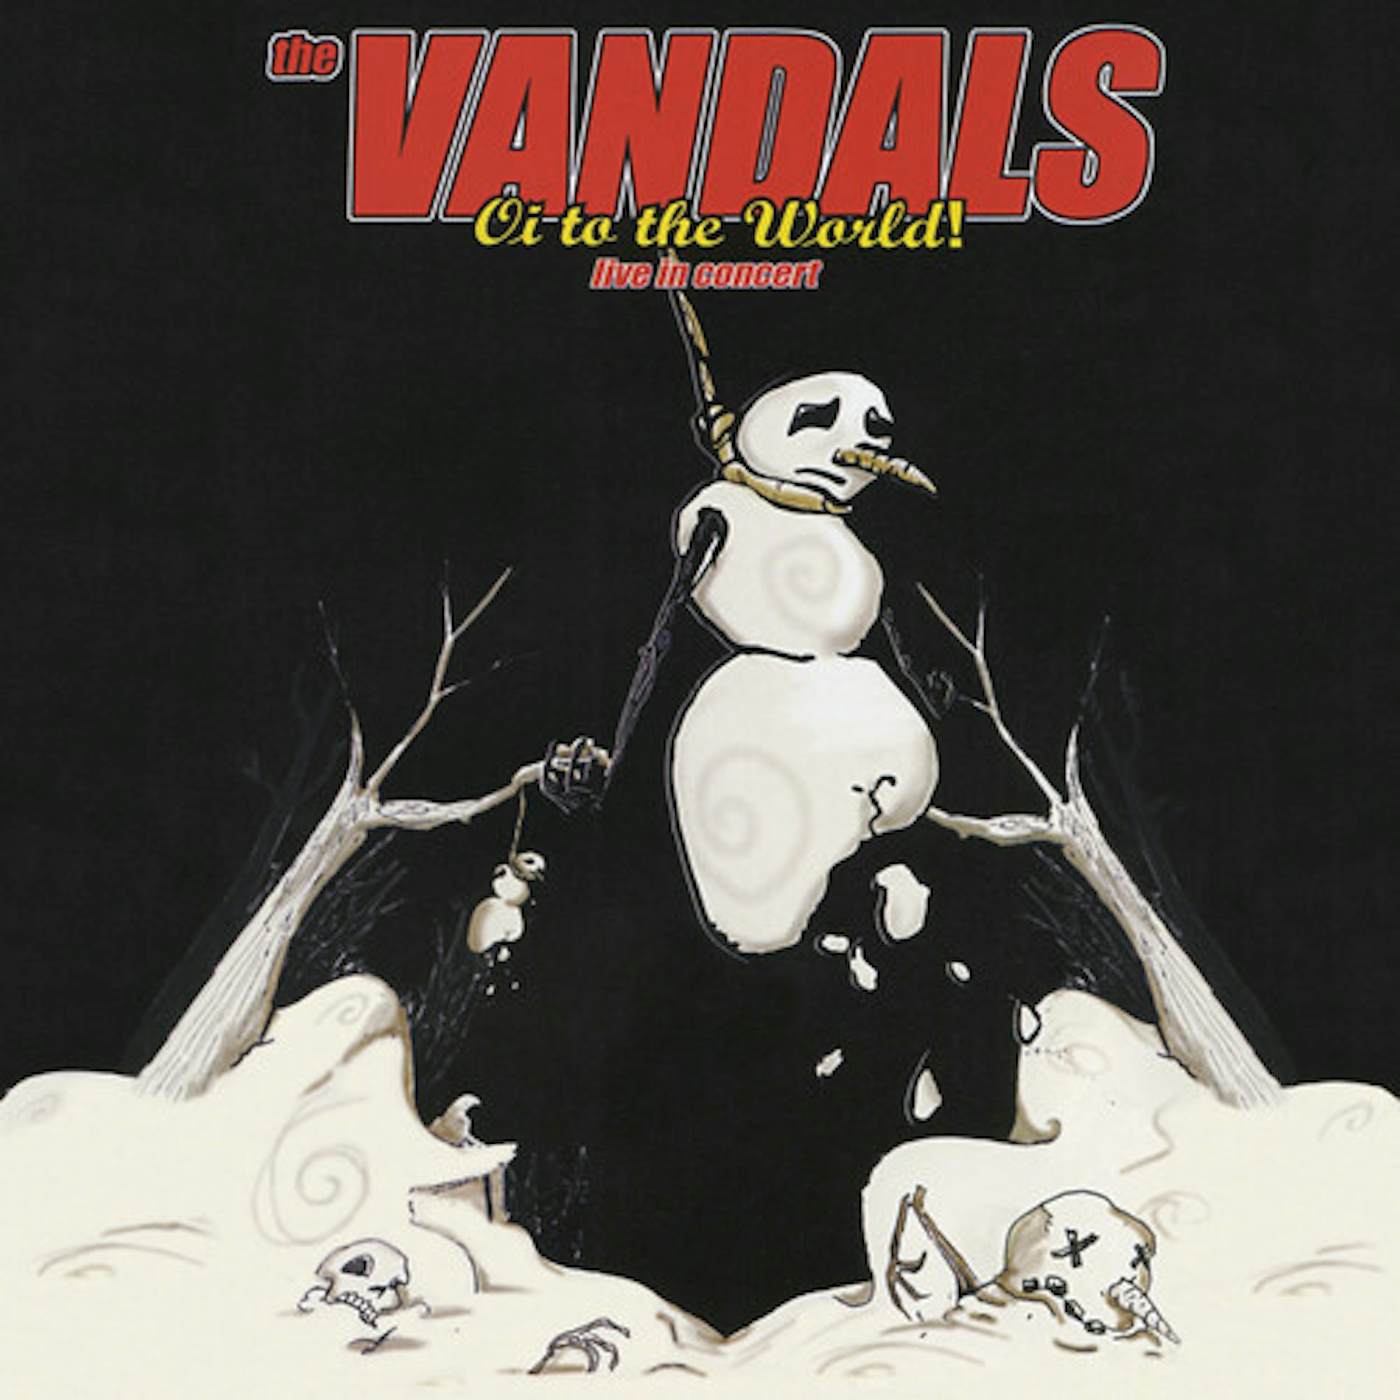 The Vandals  Oi to the World! Live in Concert Vinyl Record